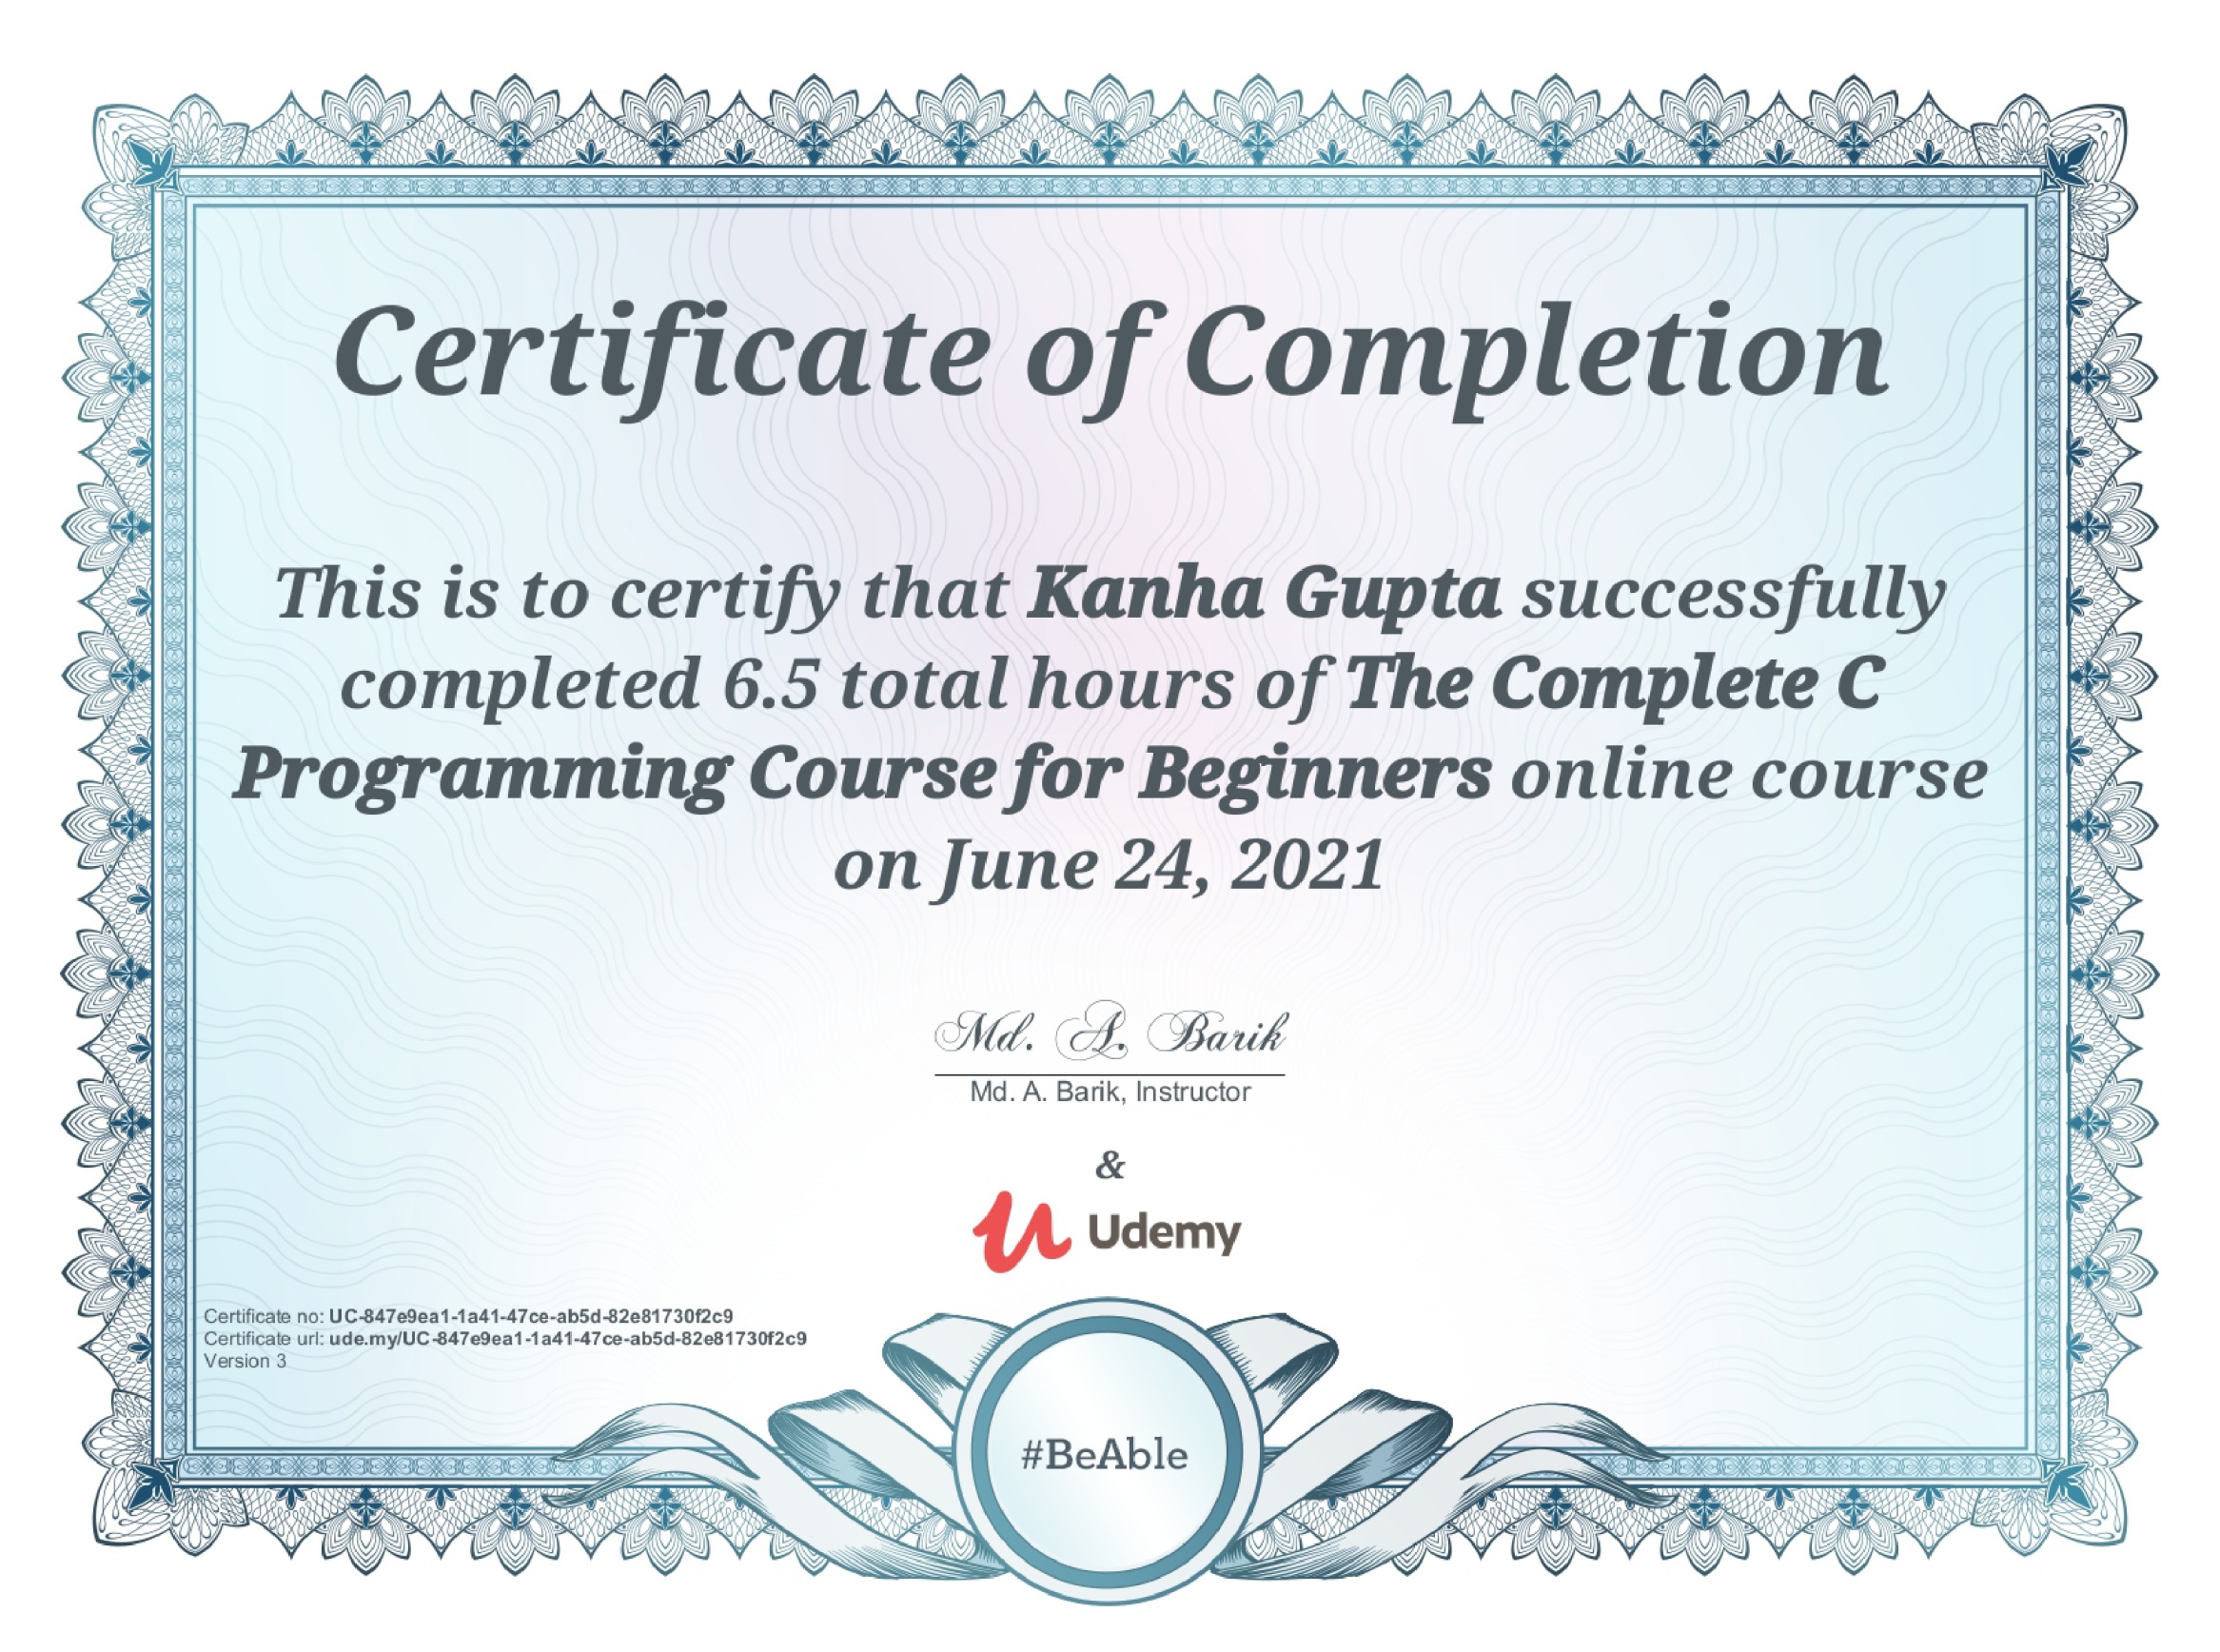 Complete C Programming Course, Md. A. Barik (Instructor), UDEMY